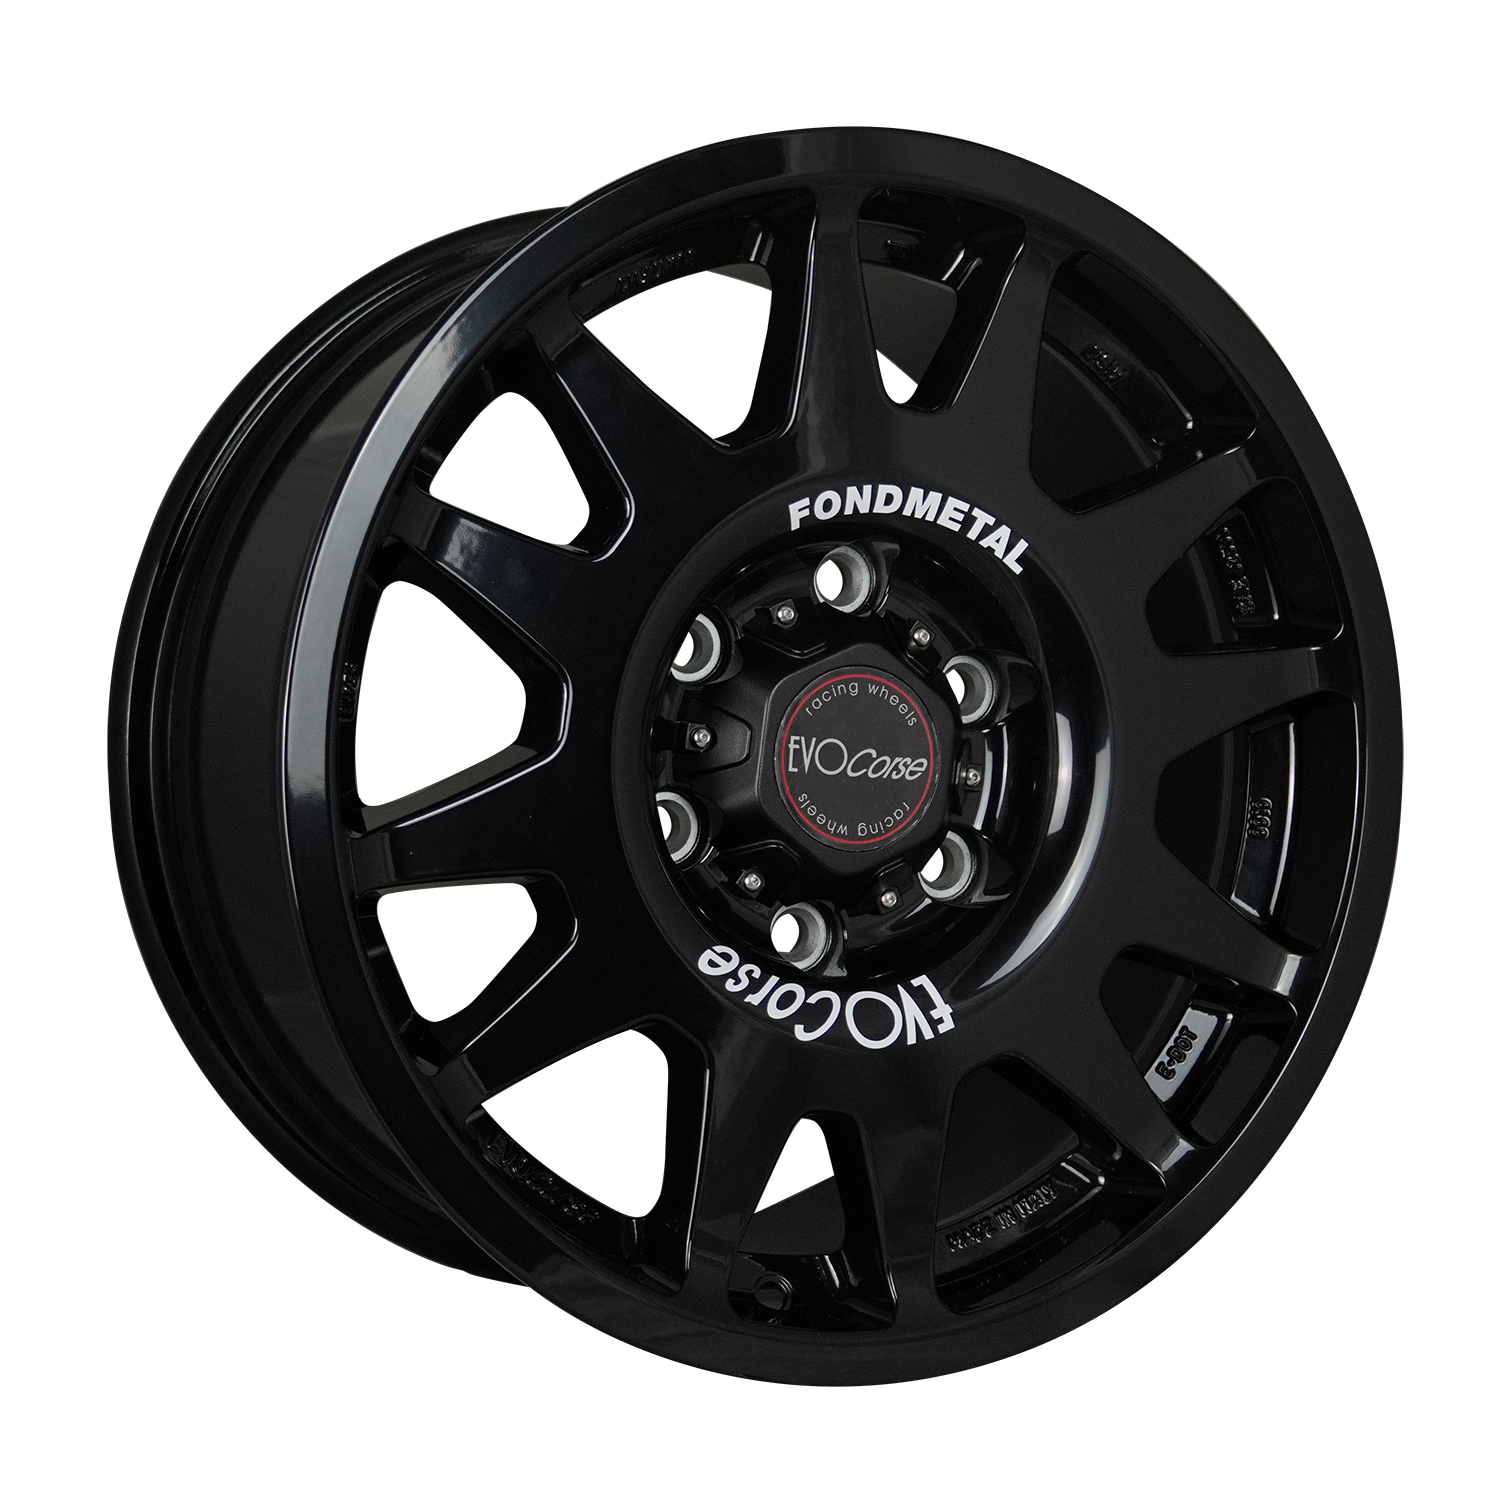 Ineos Grenadier alloy wheel for the grenadier, matt black close-up by Evo Corse, made in Italy, 17 x 8 inch 45 offset, an alloy race wheel off-road best offset and load rating for the grenadier by Ineos , suits BFG Toyo Falken GoodYear etc